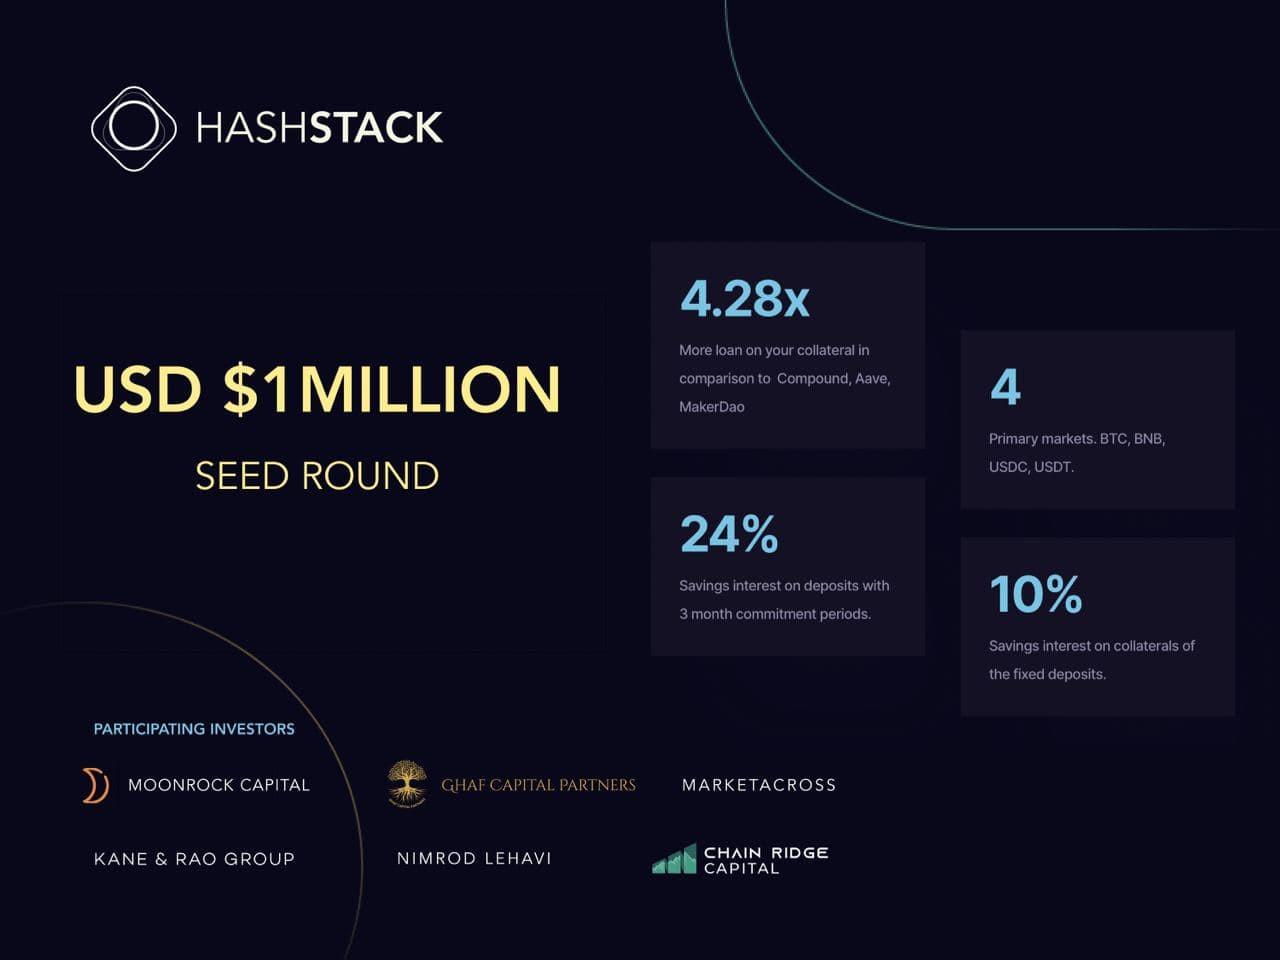 Hashstack secures $1 million seed funding from Moonrock, GHAF Capital and others as it brings under-collateralized loans to DeFi space